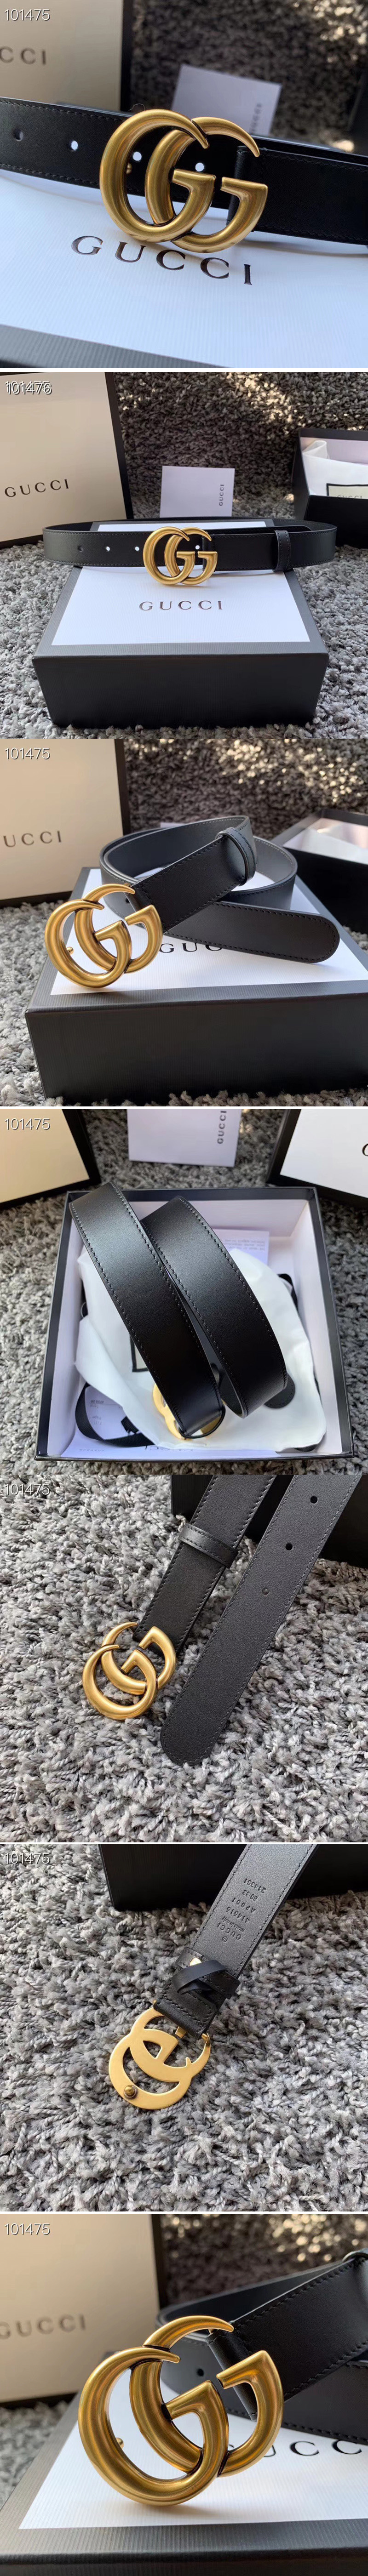 Replica Men's Gucci 414516 30mm Leather belt with Gold Double G buckle in Black Leather